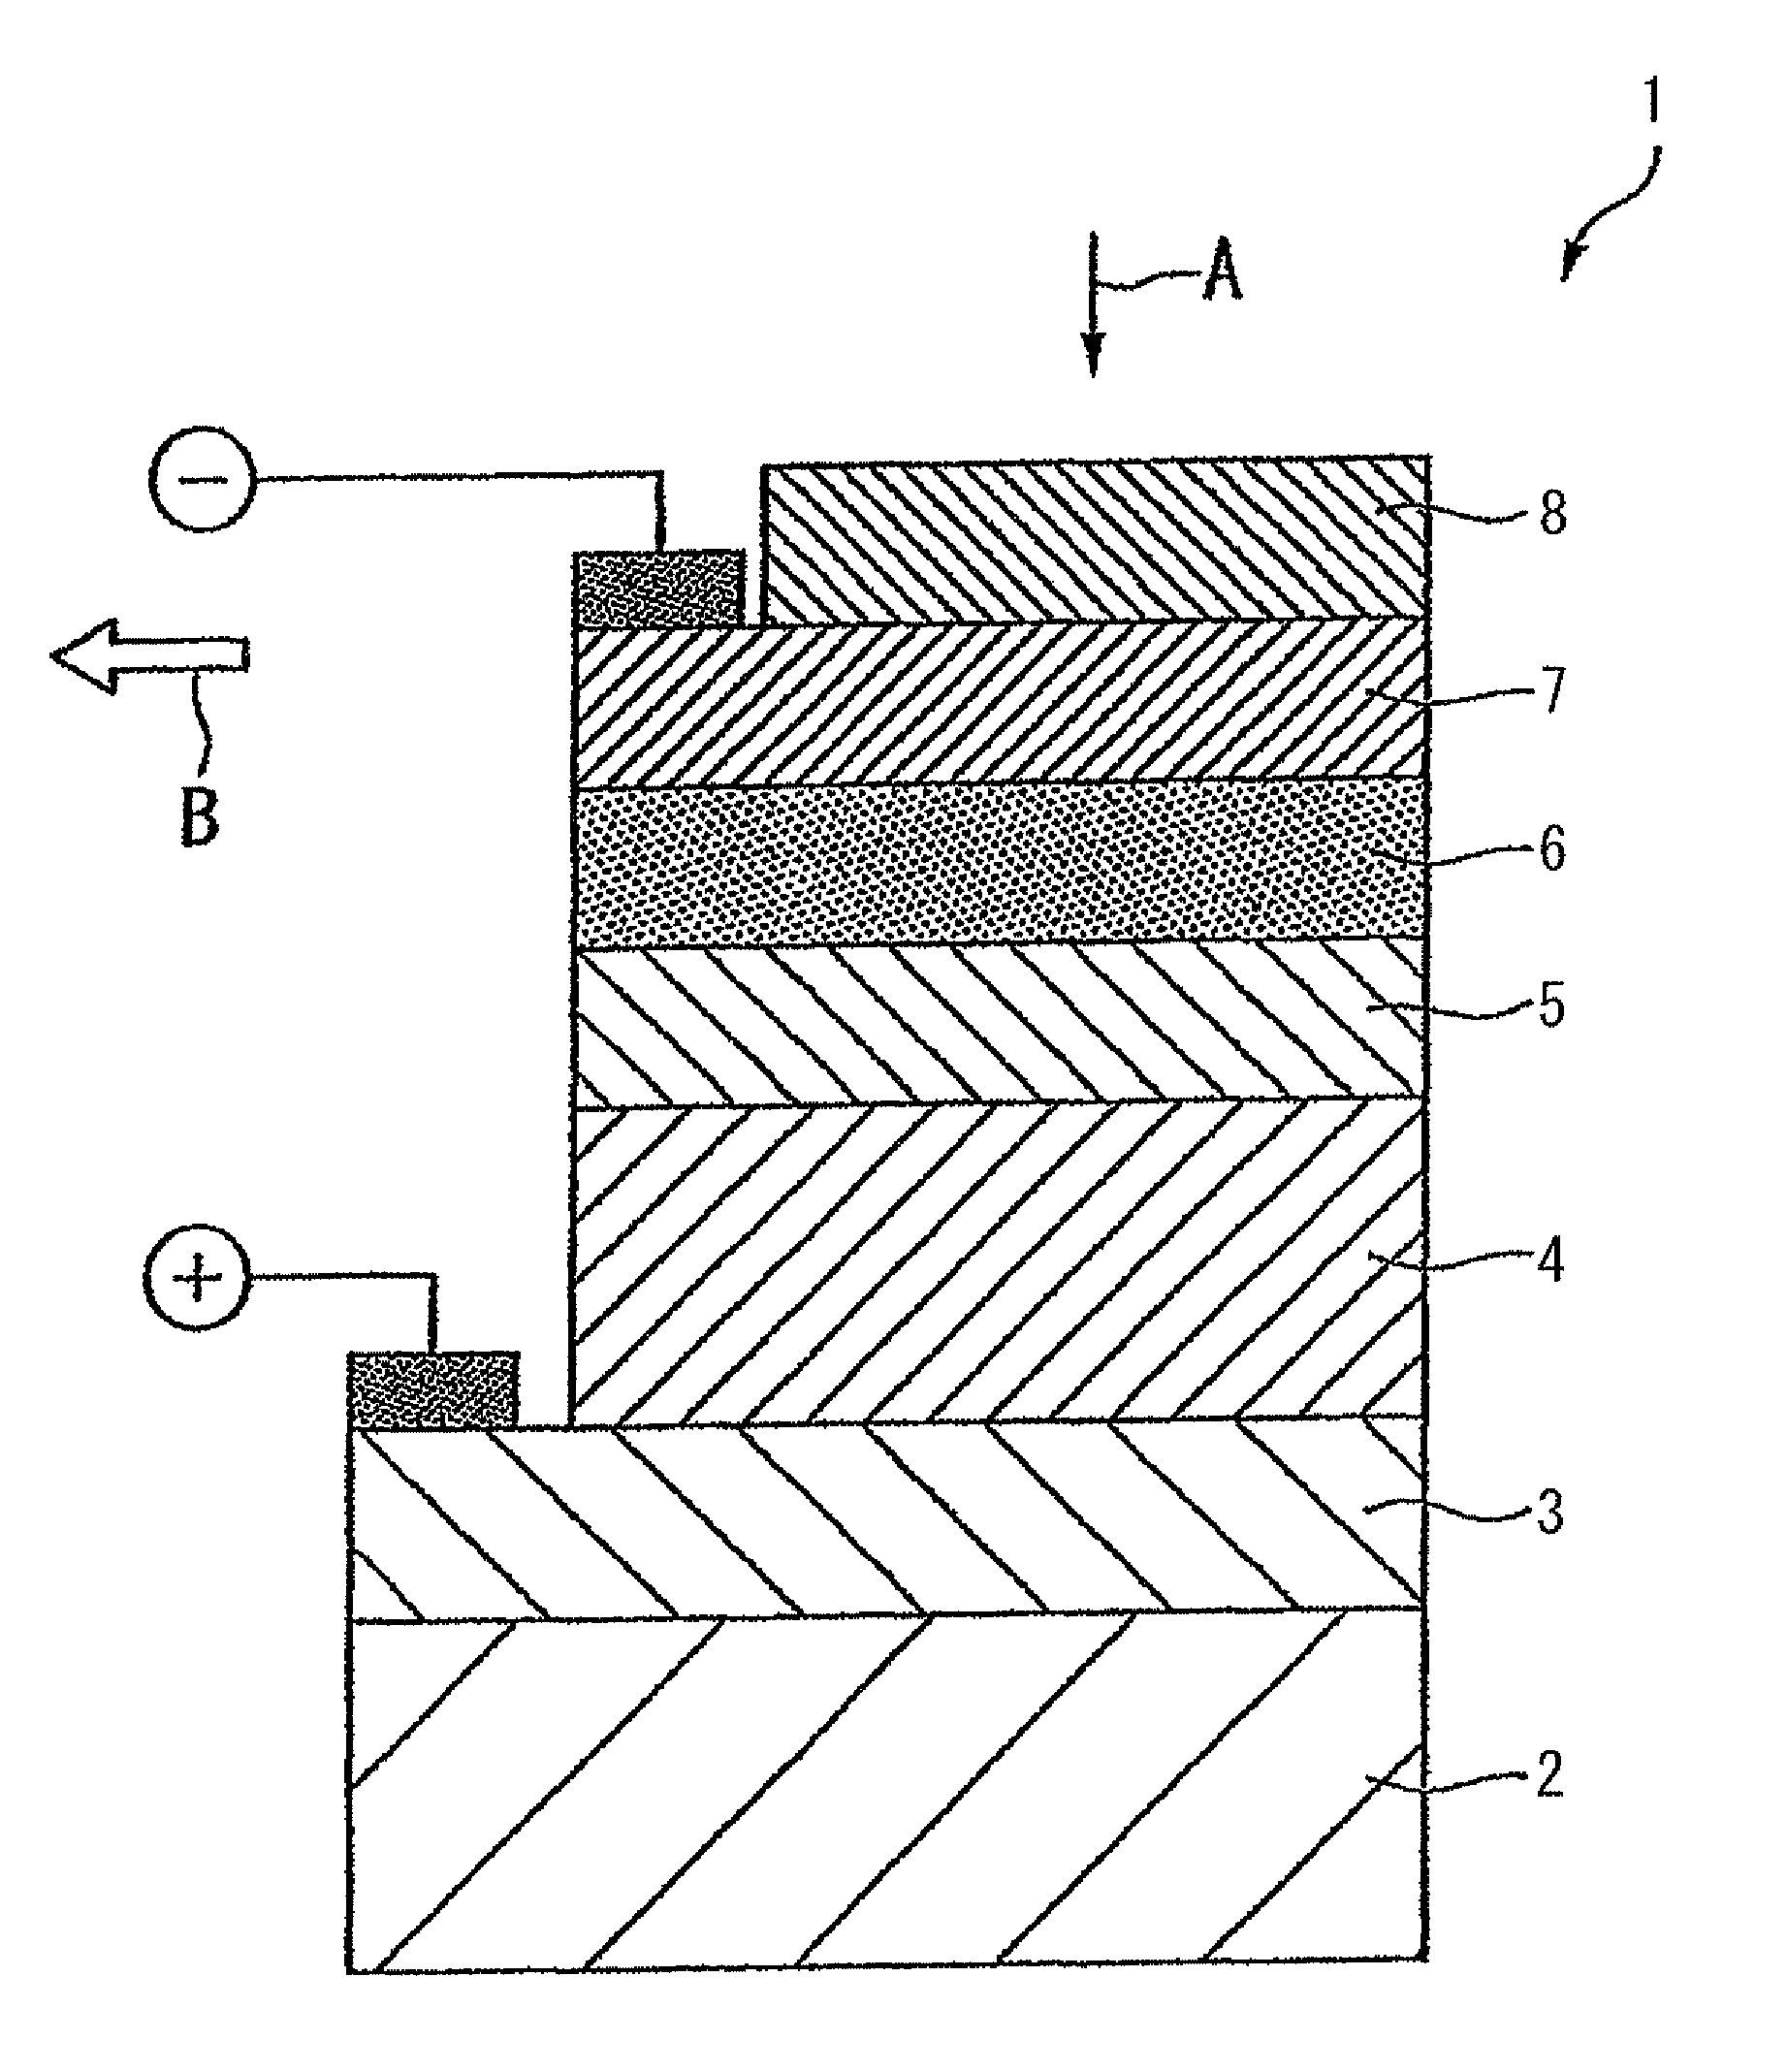 Coating solution for forming a light-absorbing layer of a chalcopyrite solar cell, method of producing a light-absorbing layer of a chalcopyrite solar cell, method of producing a chalcopyrite solar cell and method of producing a coating solution for forming a light-absorbing layer of a chalcopyrite solar cell